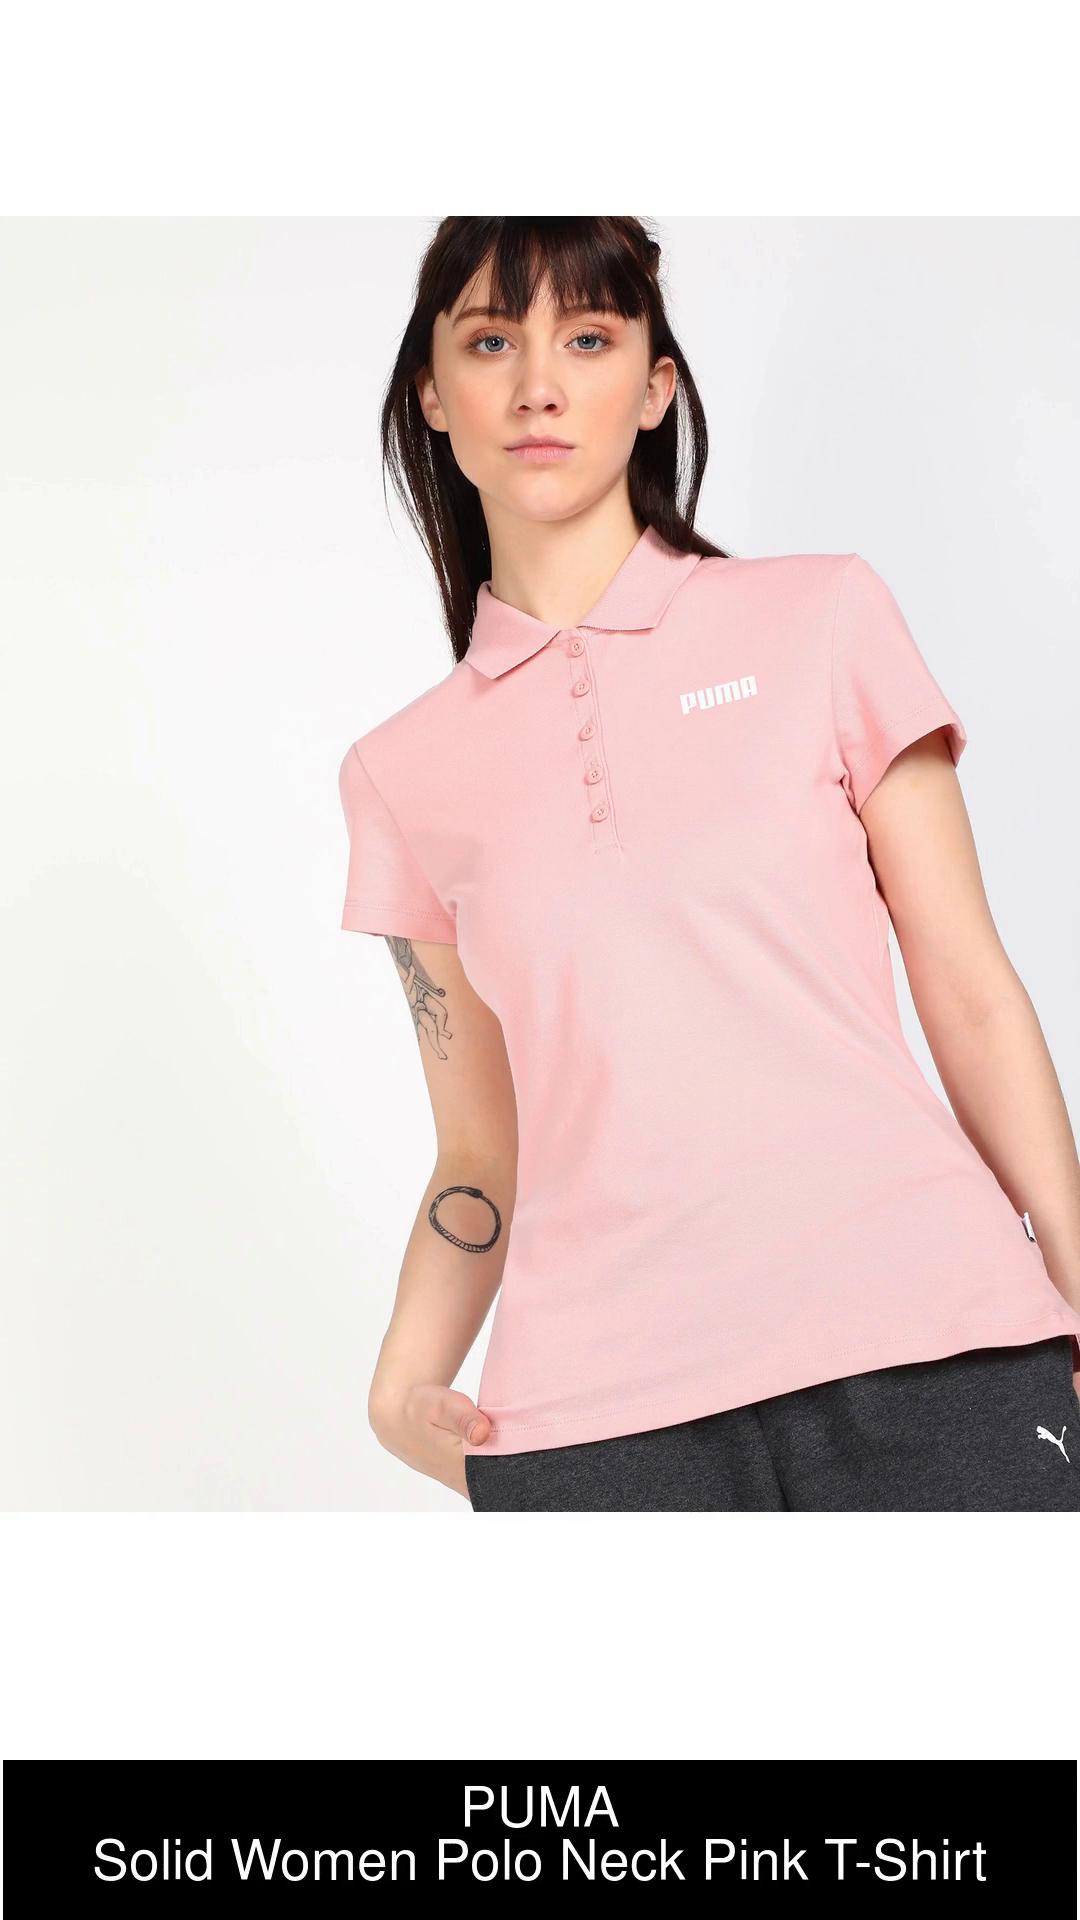 PUMA Solid Women Neck Polo Prices Women in Polo Online Best Pink India Solid Pink T-Shirt PUMA Neck Buy at - T-Shirt